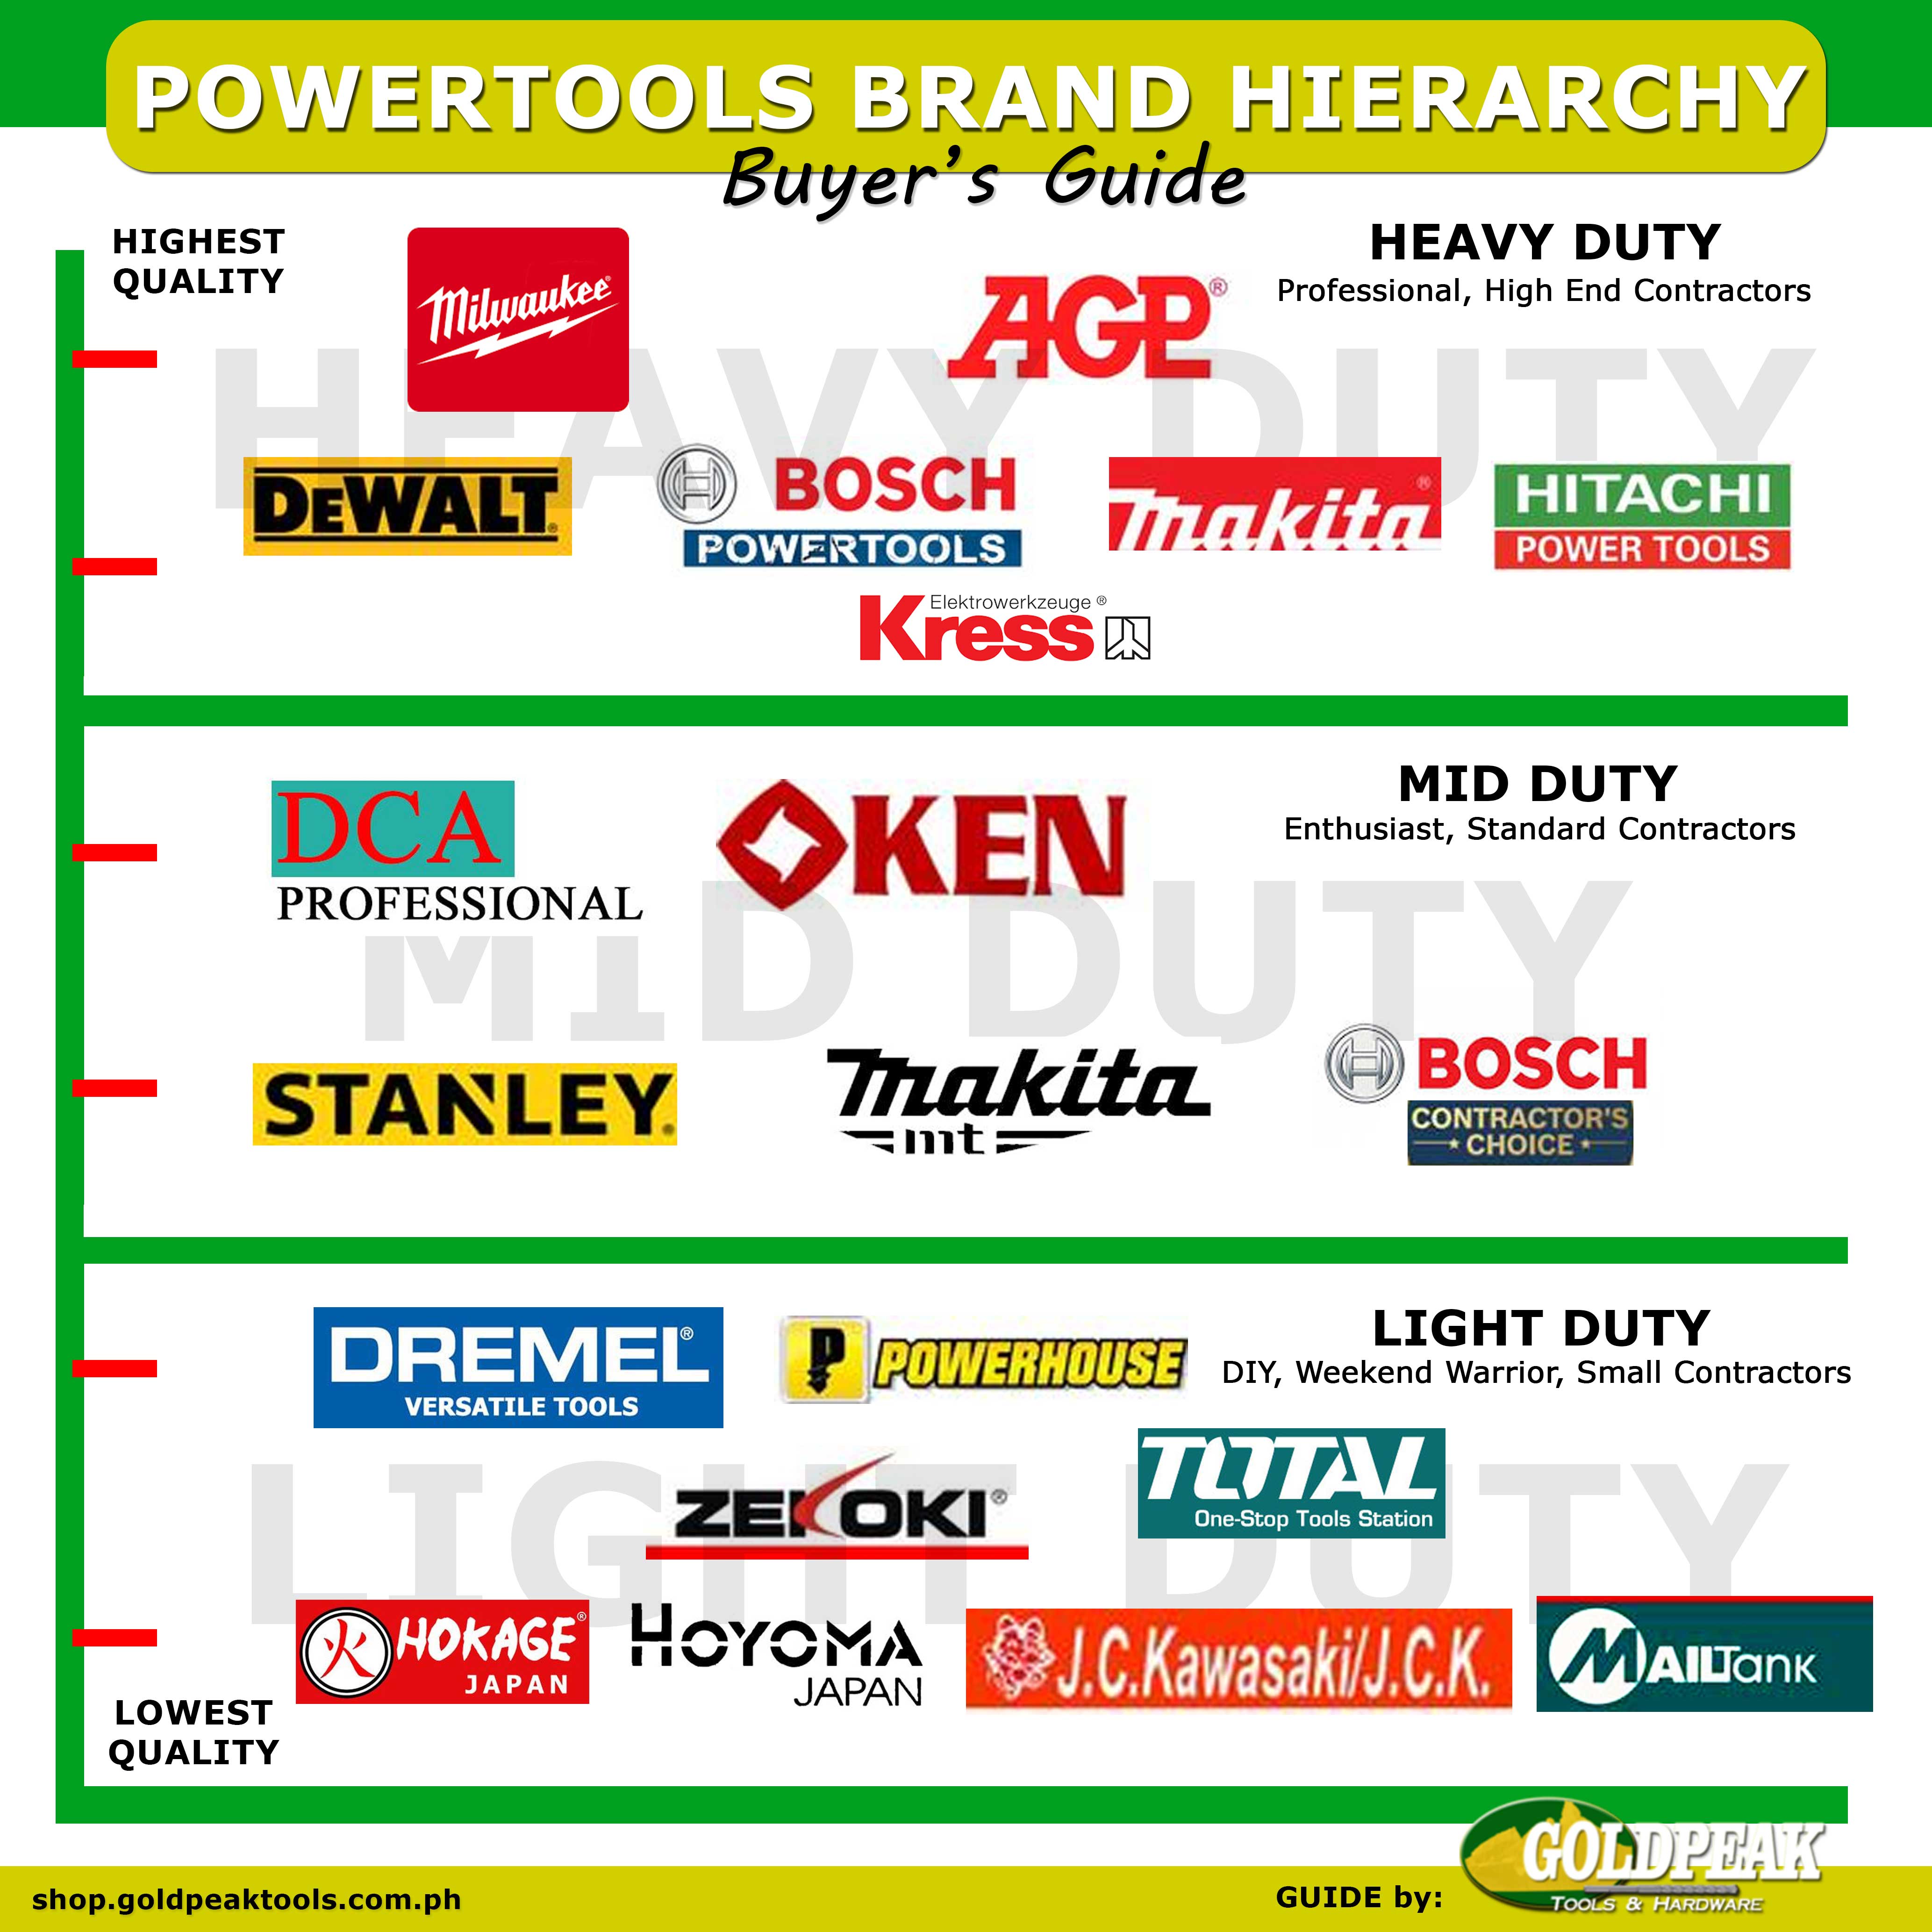 Buyer Guide of the Brand Hierarchy of Power tools in the Philippines